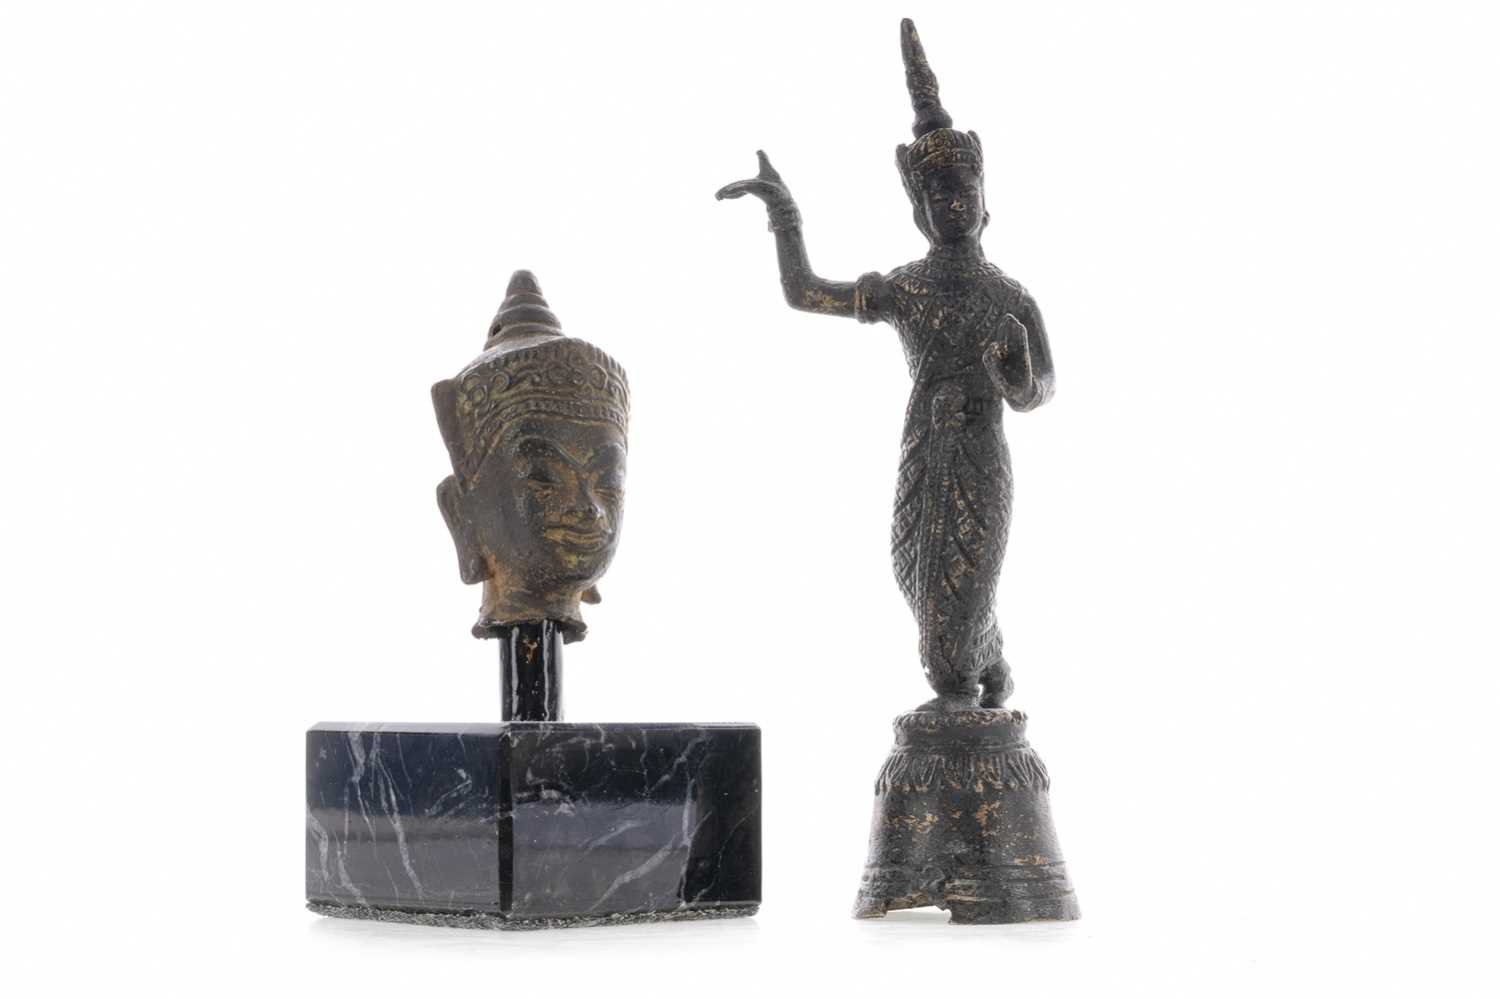 A CAMBODIAN BRONZE STATUE OF APSARA OR DANCING DEVATA AND A SMALL BUST